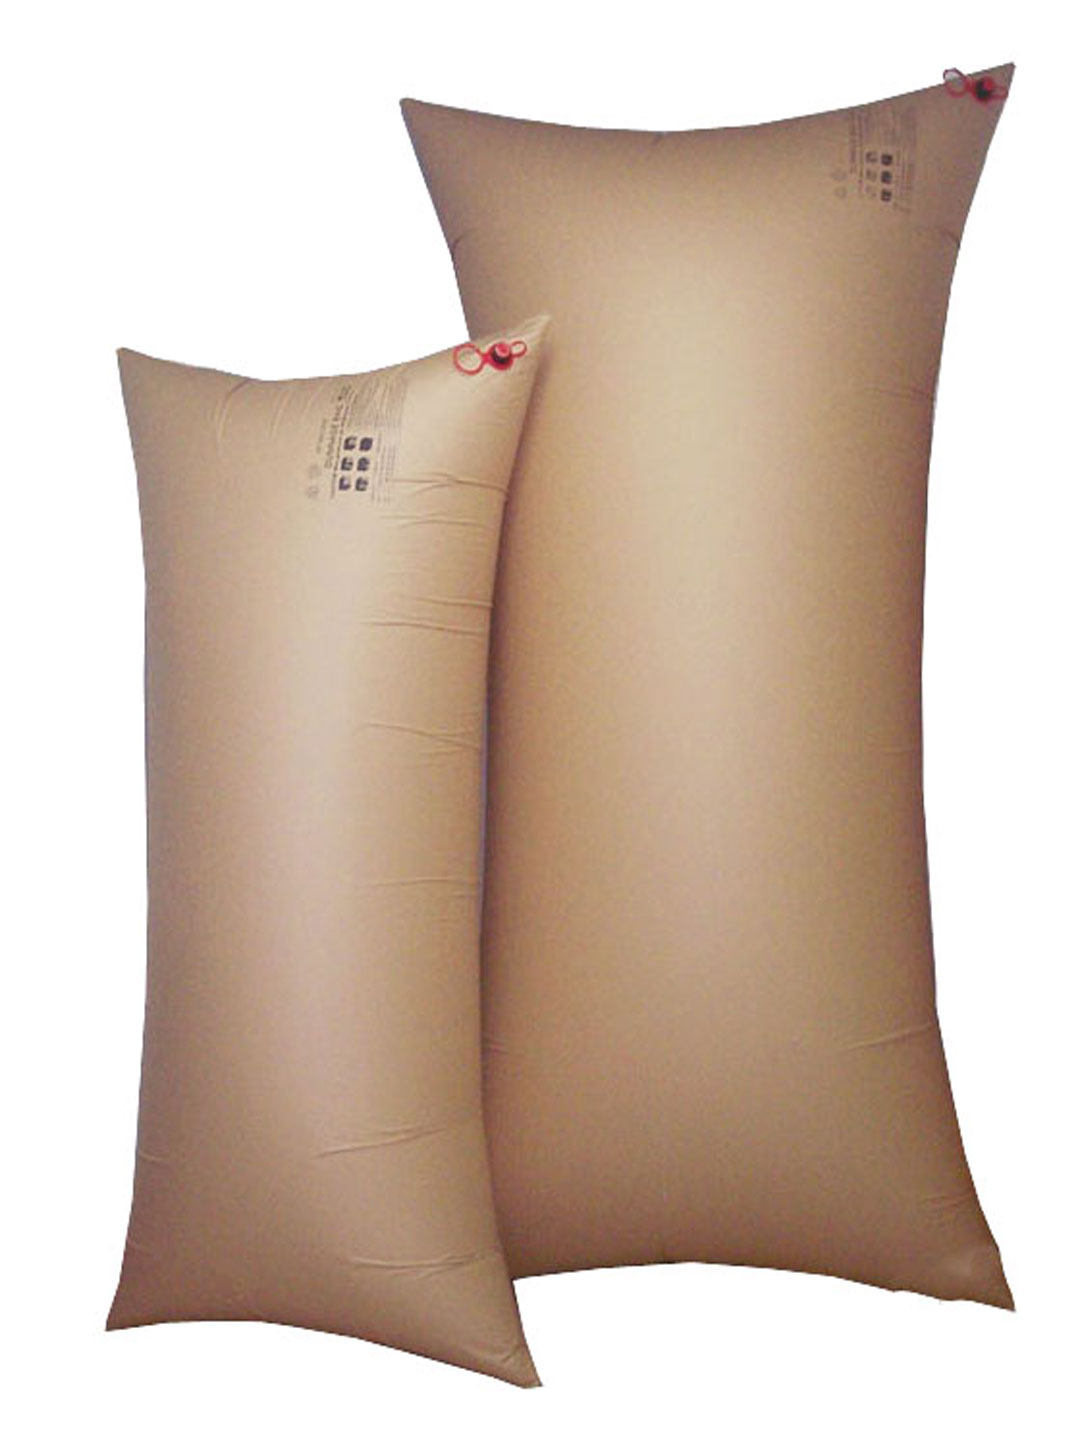 Dunnage Bags | Paper and Woven Dunnage Bags, Dunnage Air Bags, Dunnage Bags, Paper Dunnage Bags, Woven Dunnage Bags, Shipping Air Bags, Inflatable Bags,